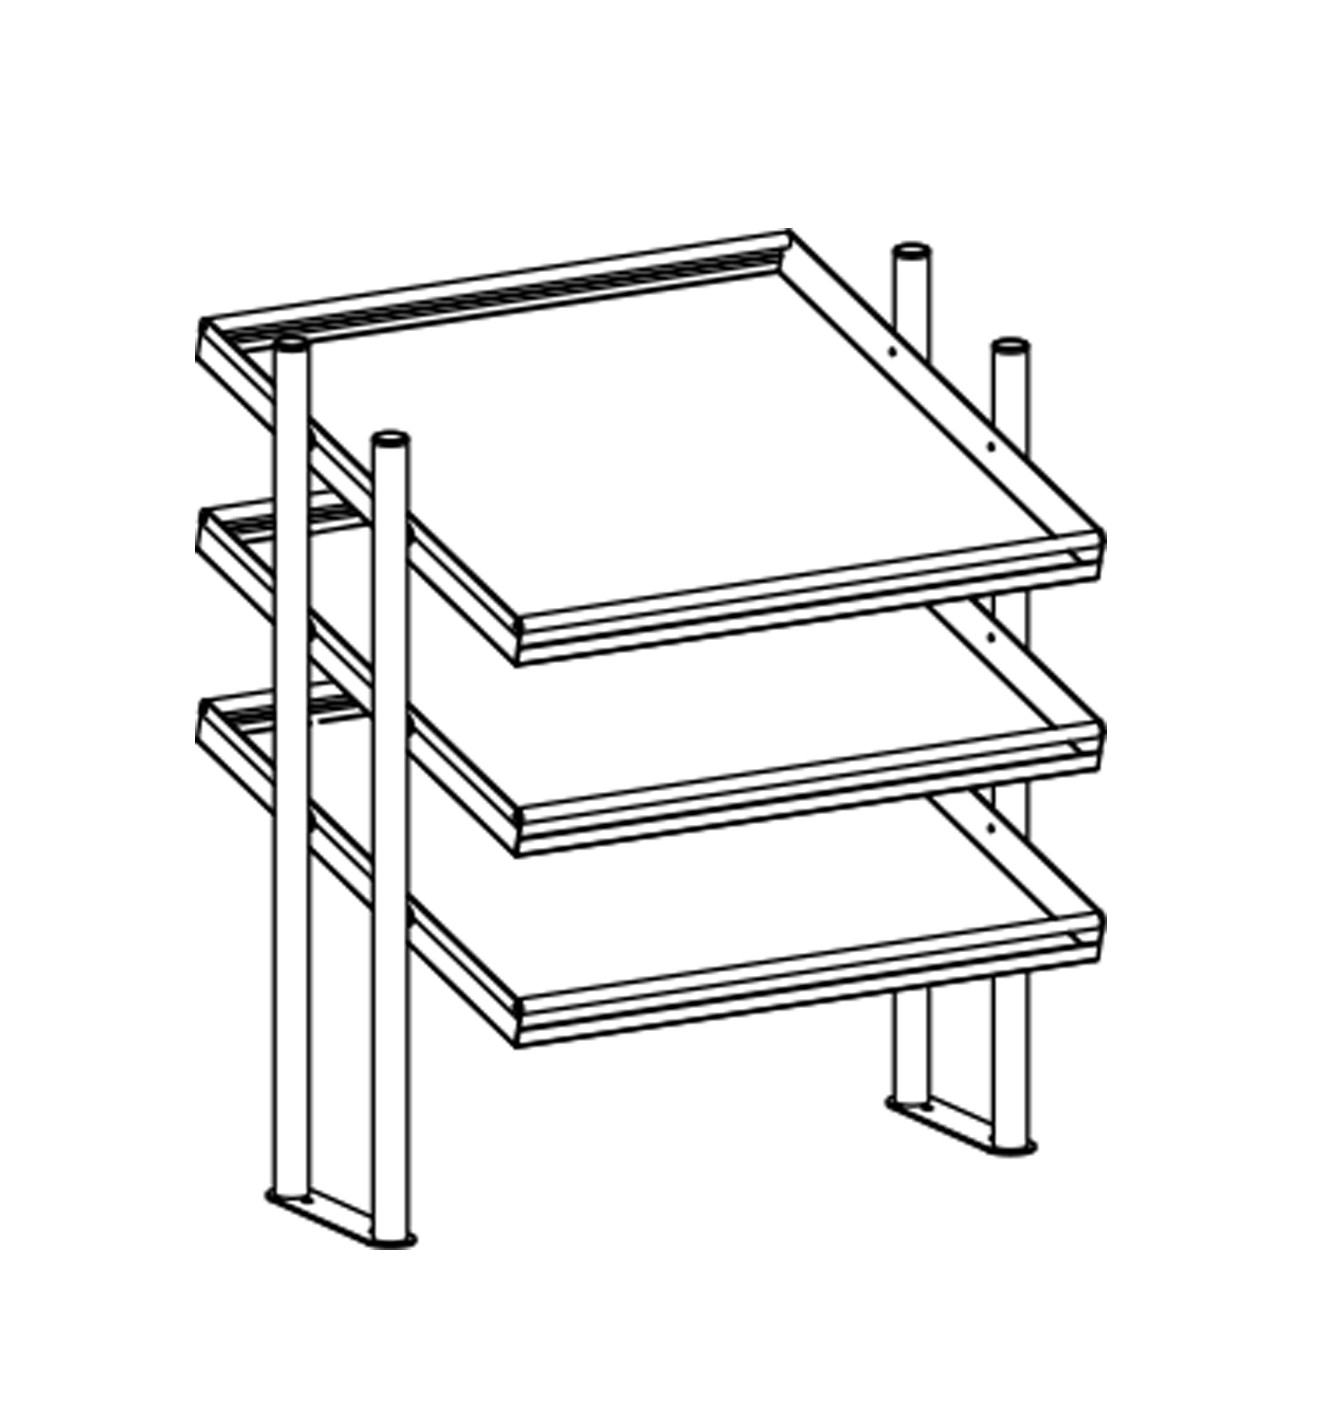 Structure for cup holders